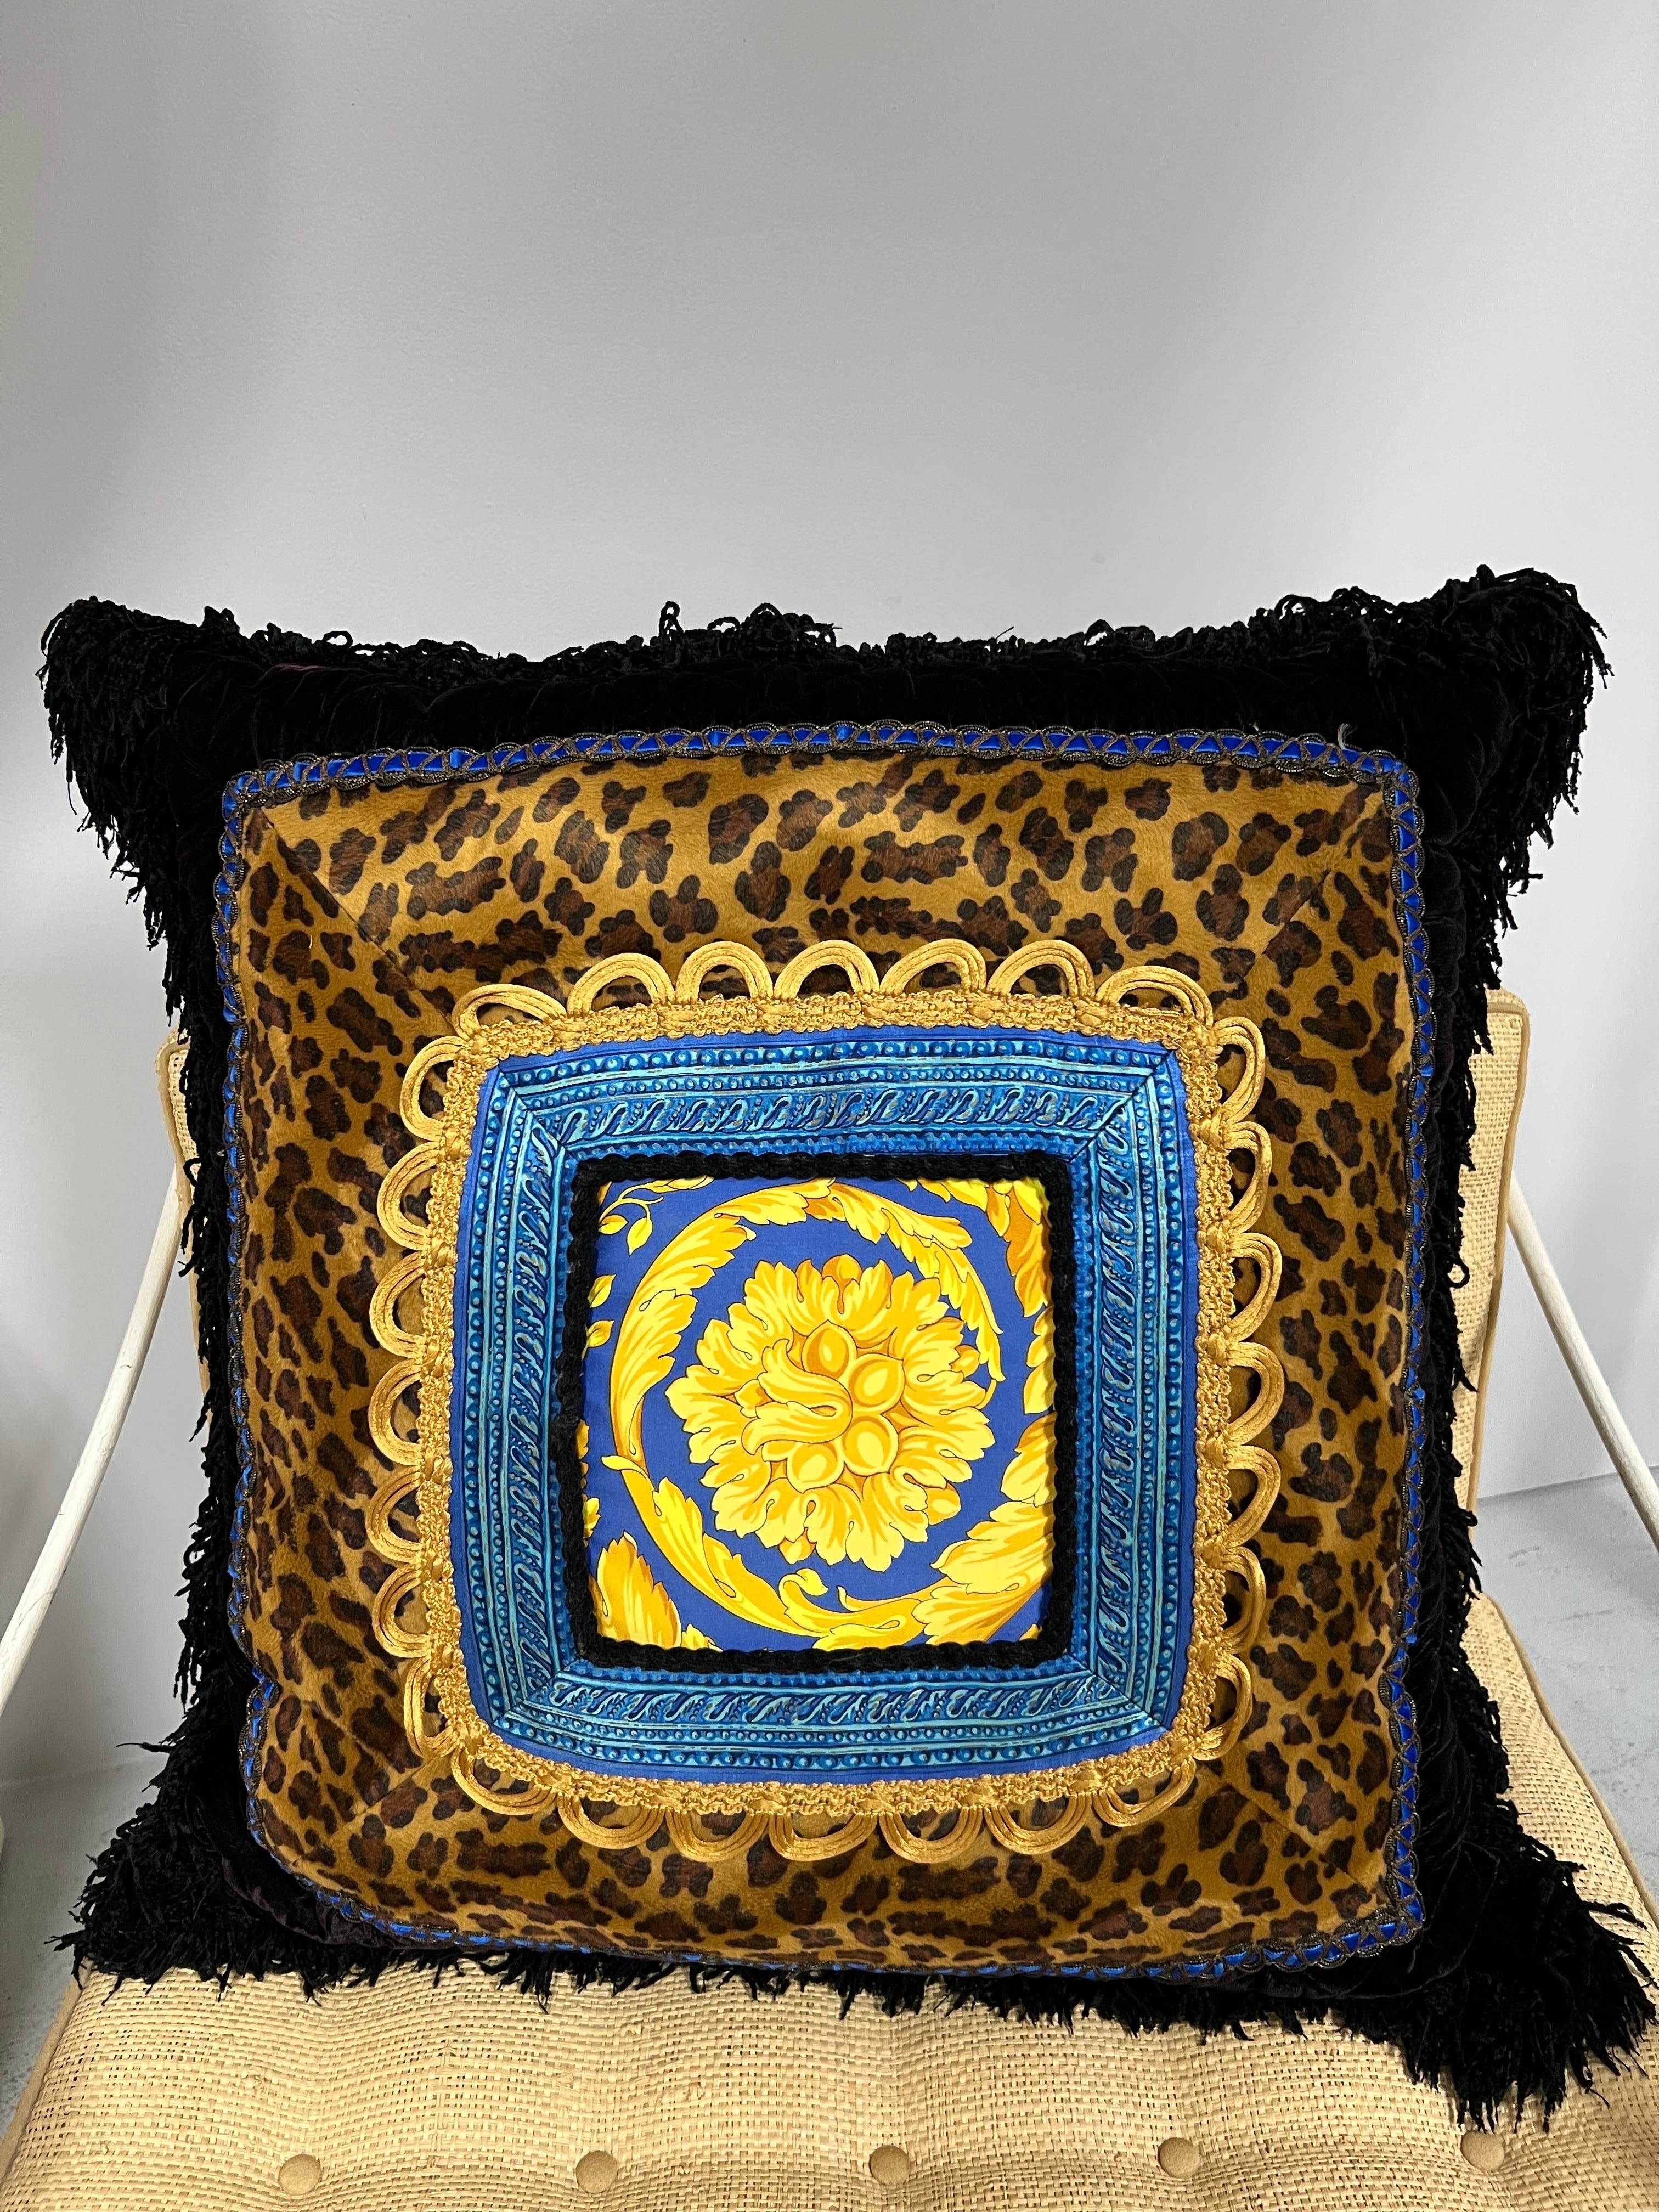 Atelier Versace 4 Large Vintage Pillows In Good Condition For Sale In Miami, FL